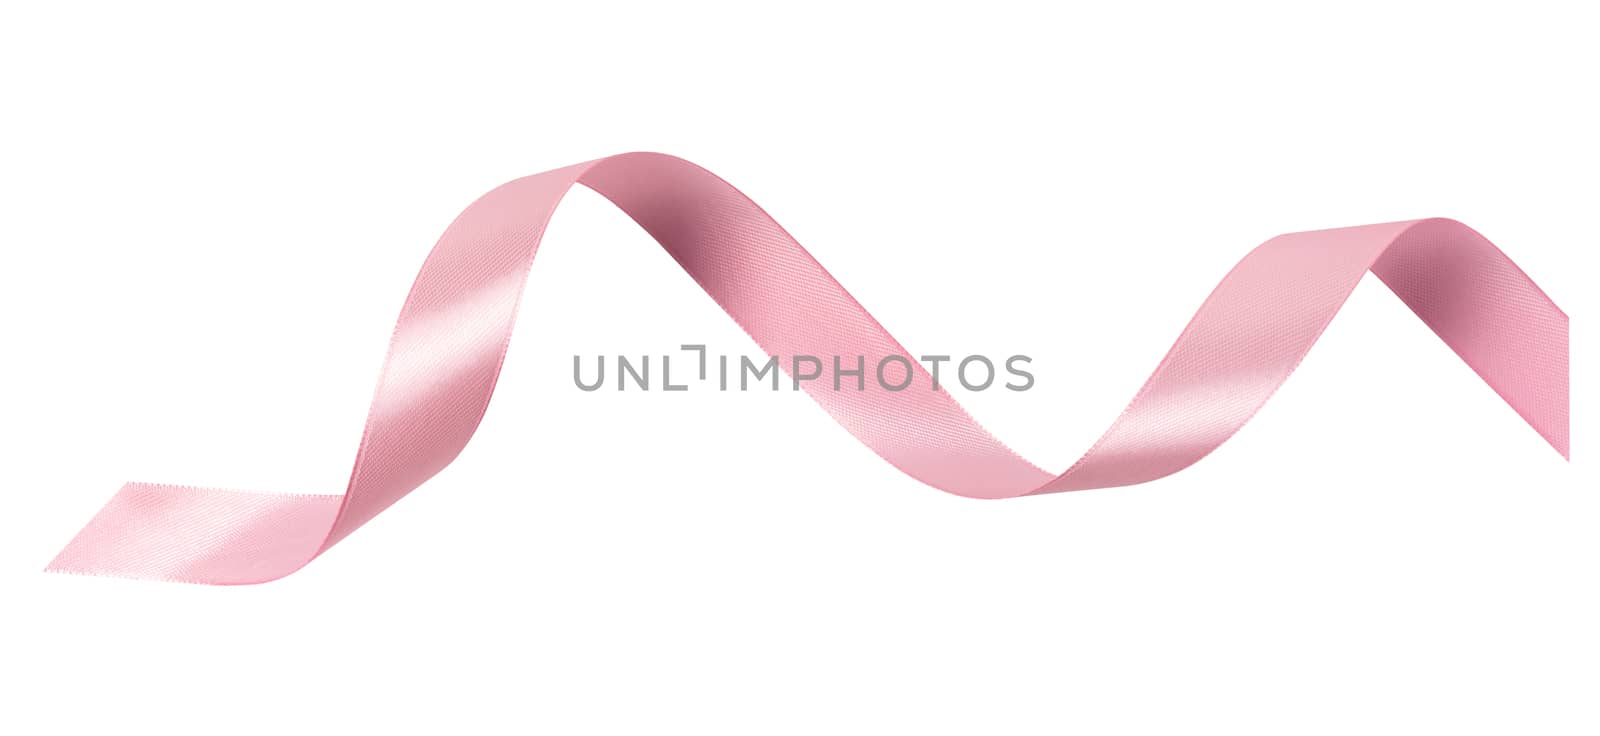 A pink ribbon isolated on a white background with clipping path.